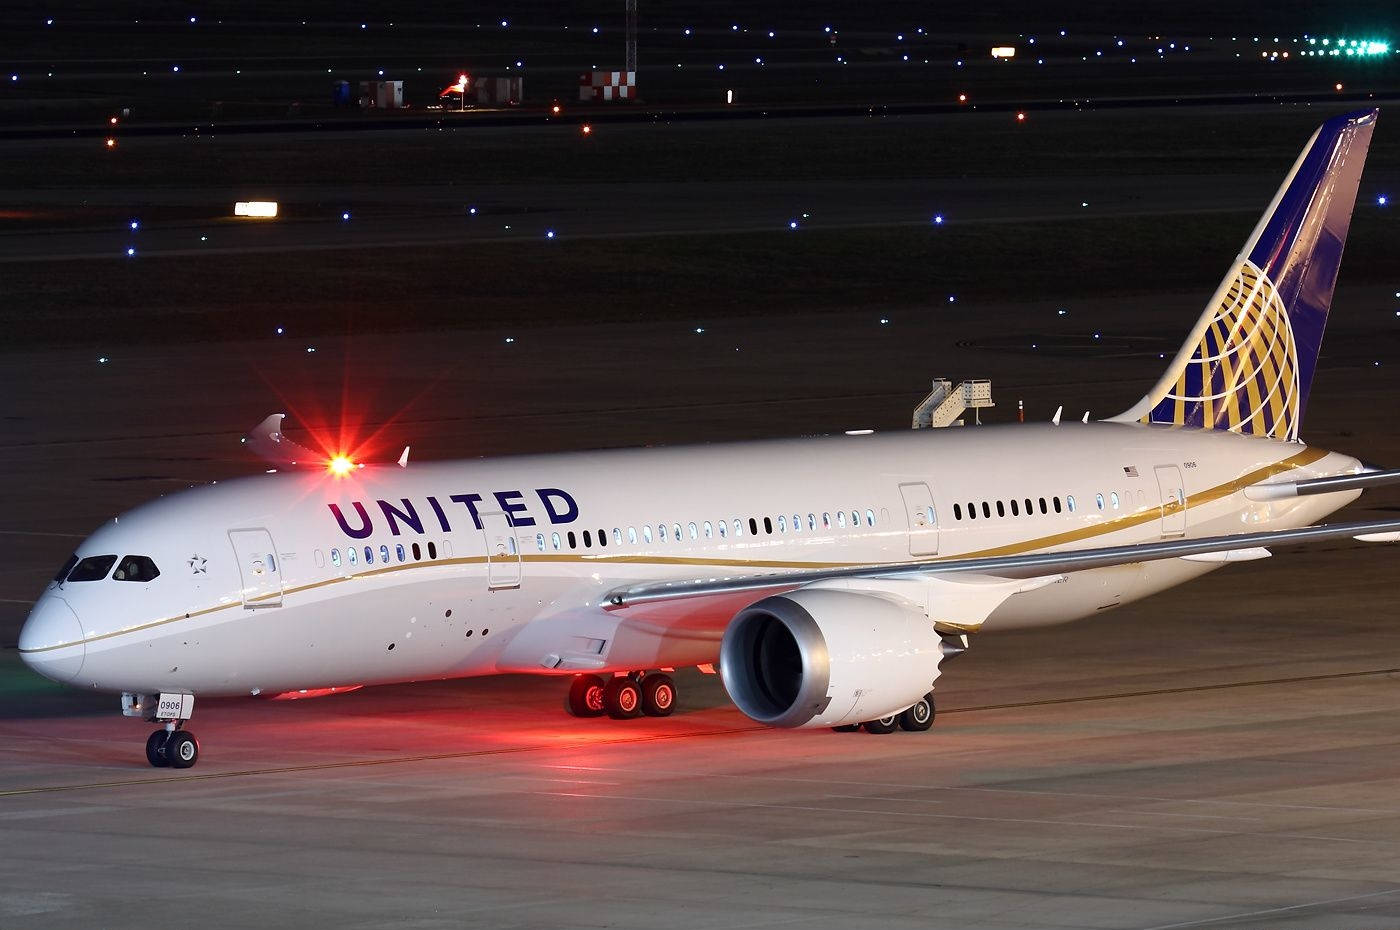 United Airlines Plane Safely Landed at Airport Wallpaper